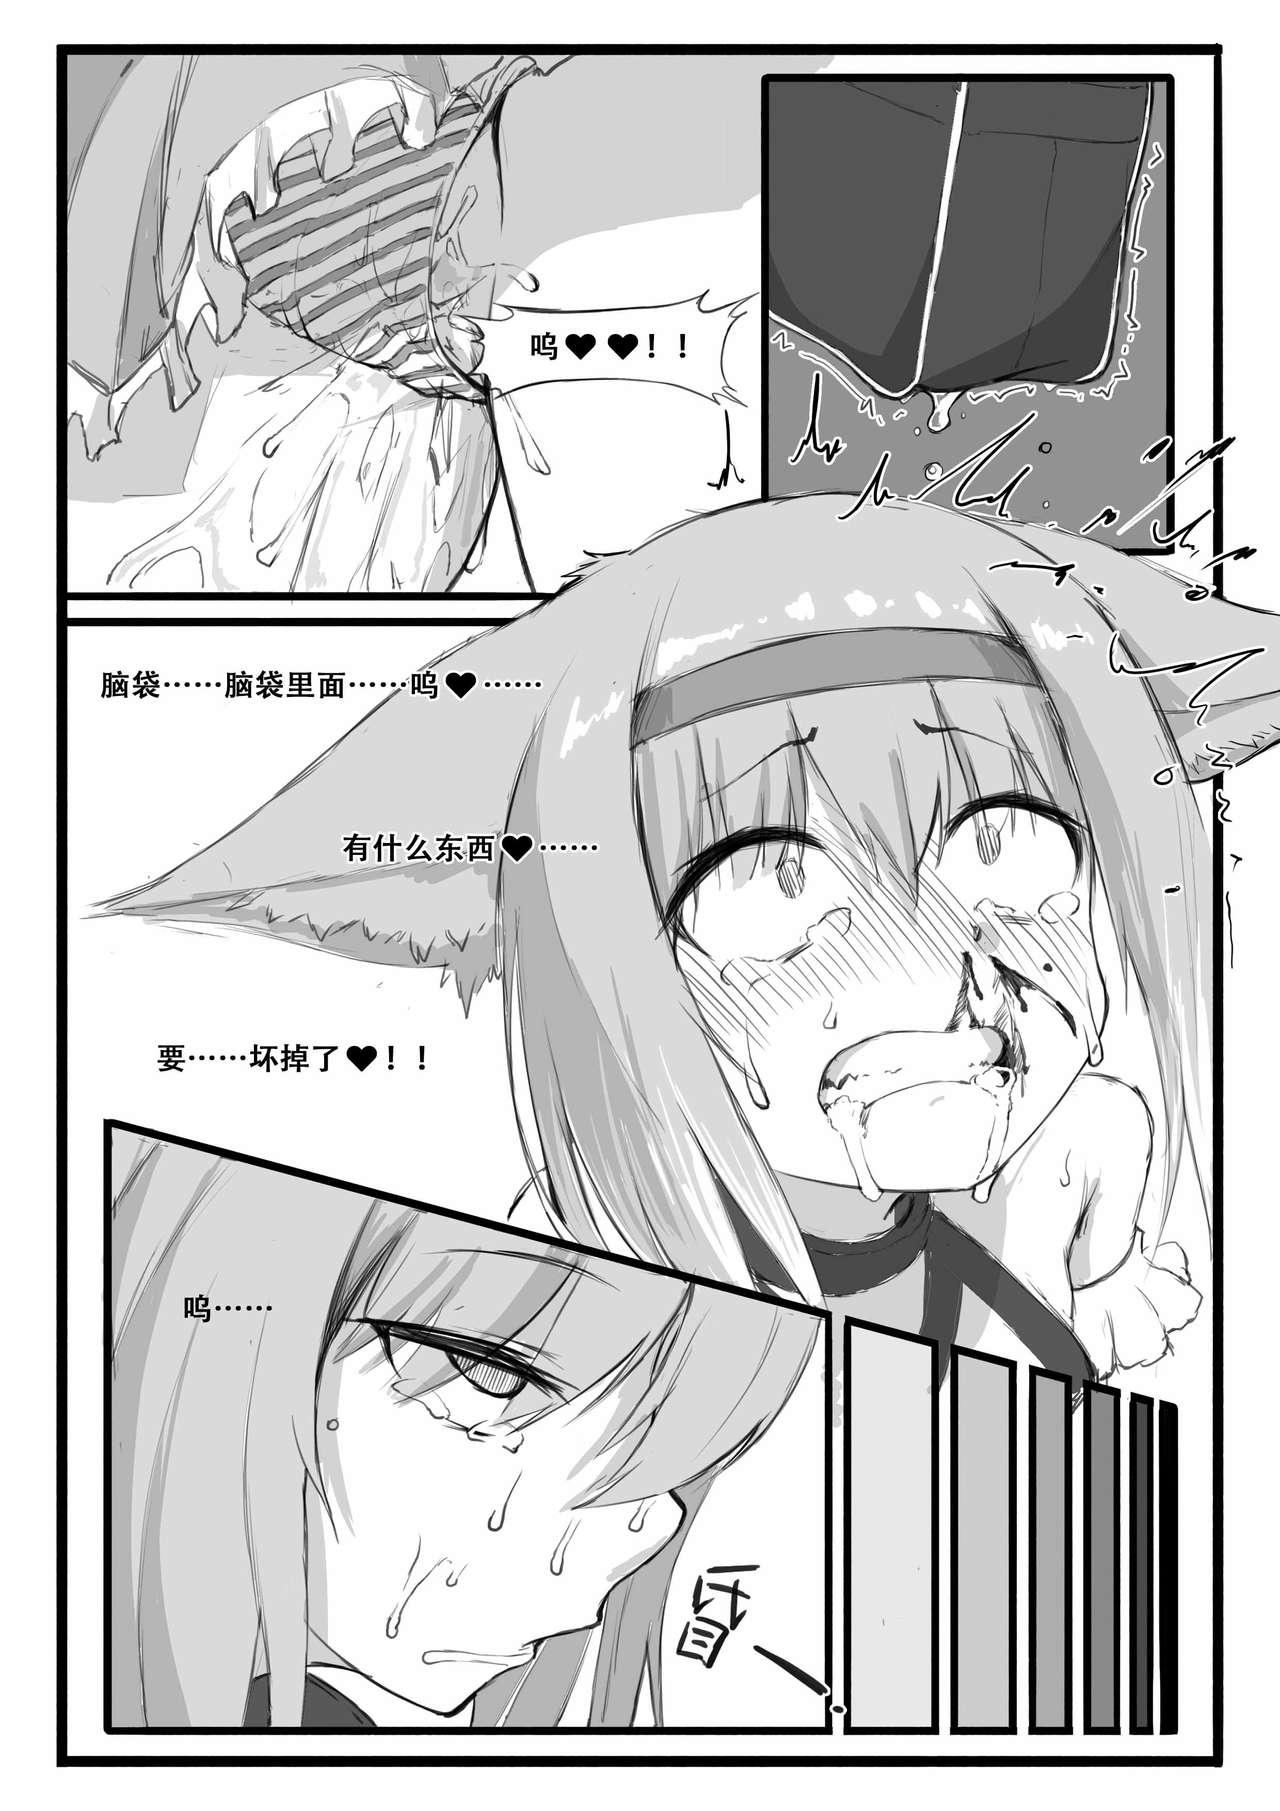 Realsex 铃兰的单人任务 - Arknights Blowjobs - Page 12